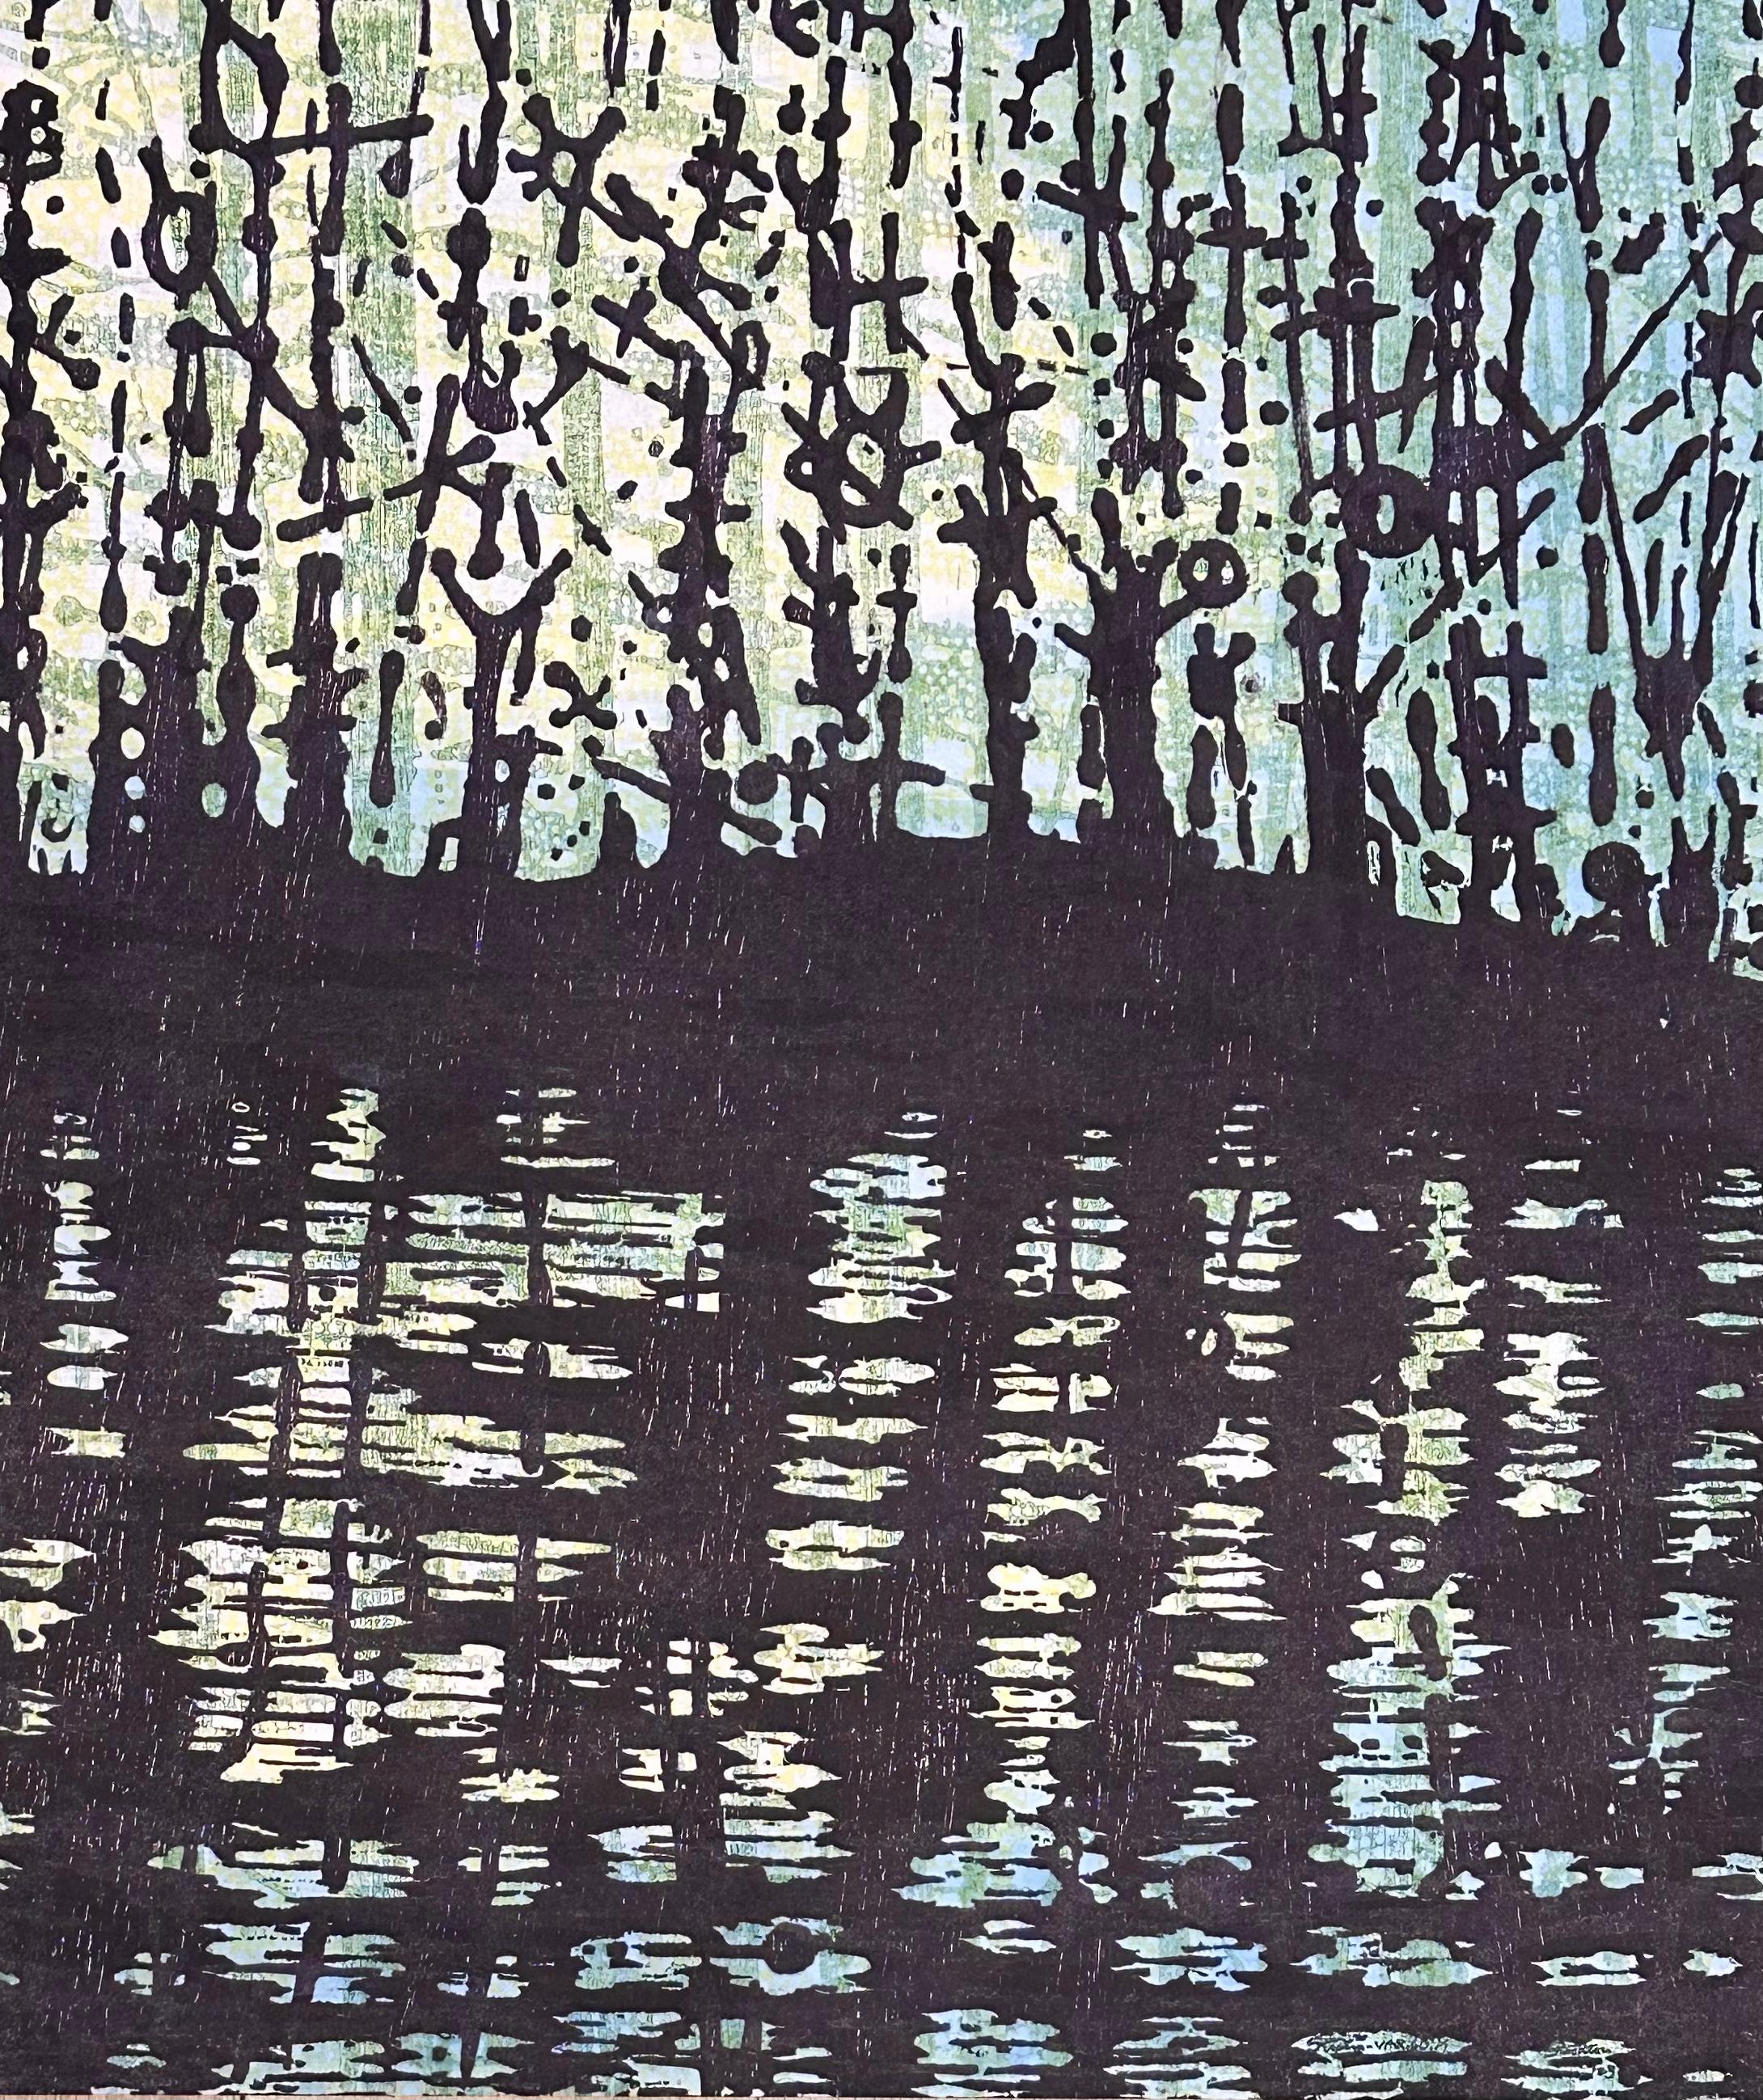 This is a unique woodcut print of a forest and stream in dark eggplant purple offset by a minty light teal greenish blue and pale yellow background. The monotype brings to mind the tradition of Japanese printing while being distinctly contemporary.